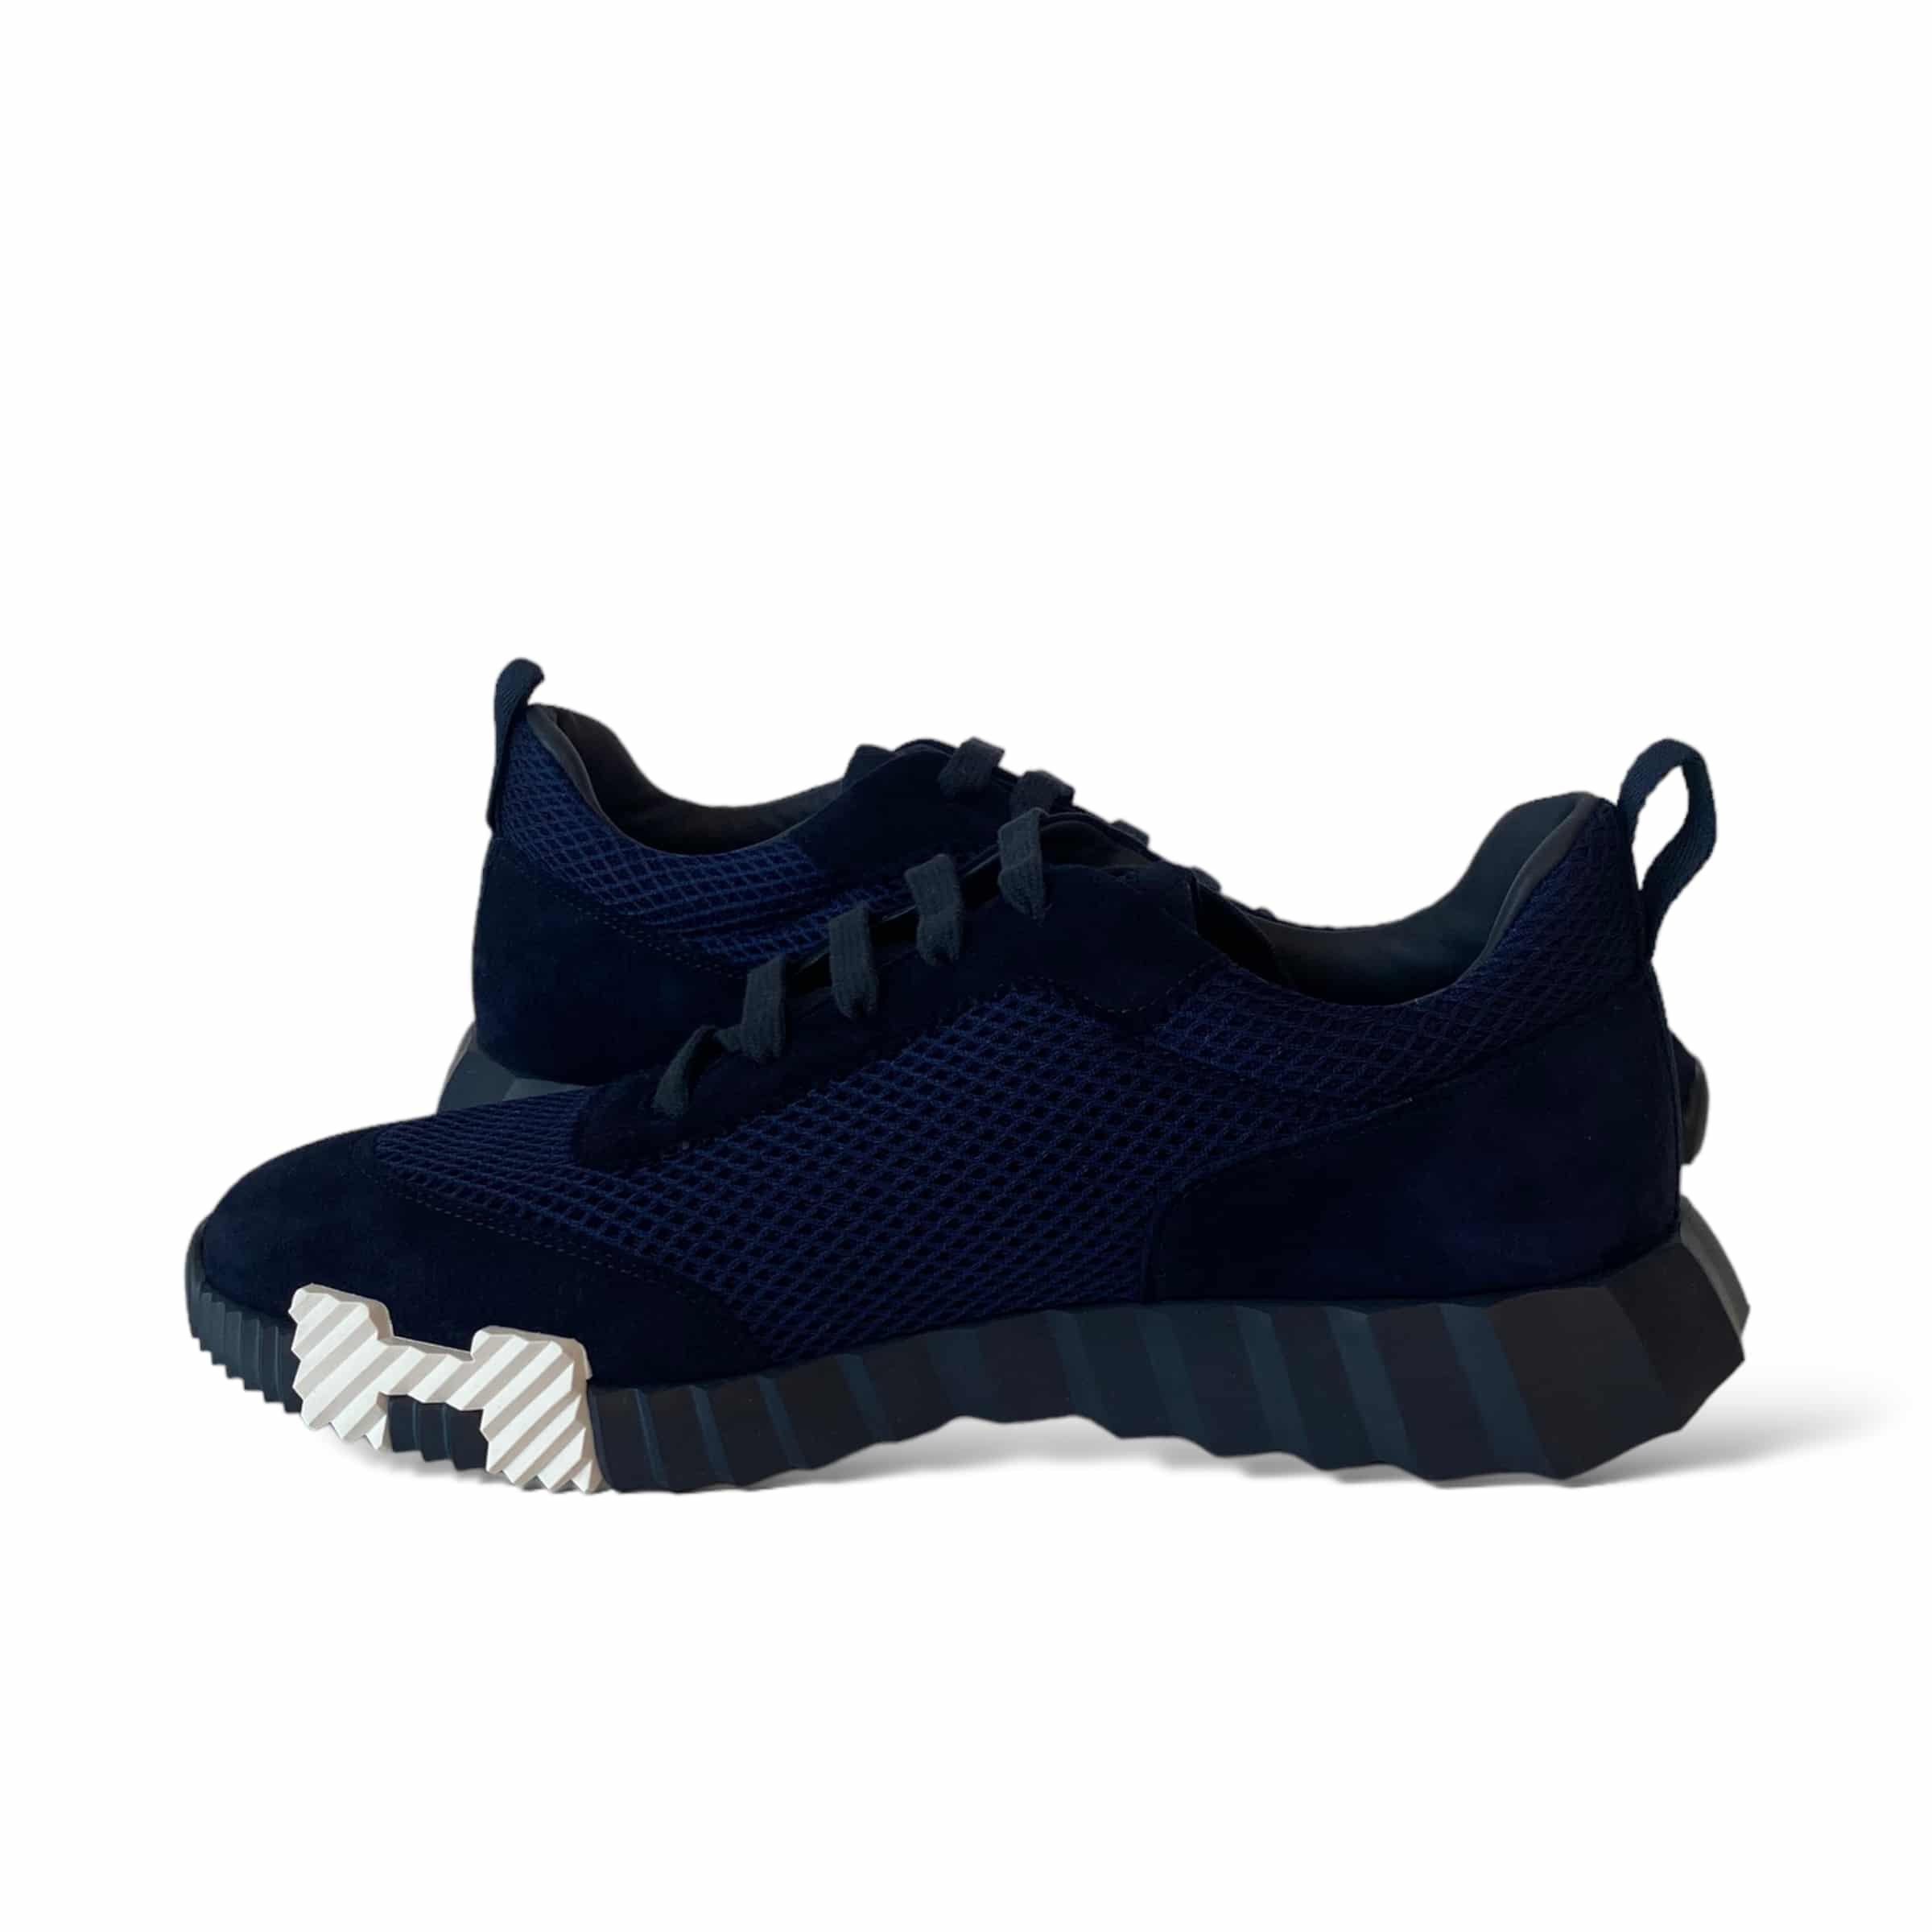 Hermes Bouncing Size 44.5 EU Sneakers Blue Marine and White | The ...